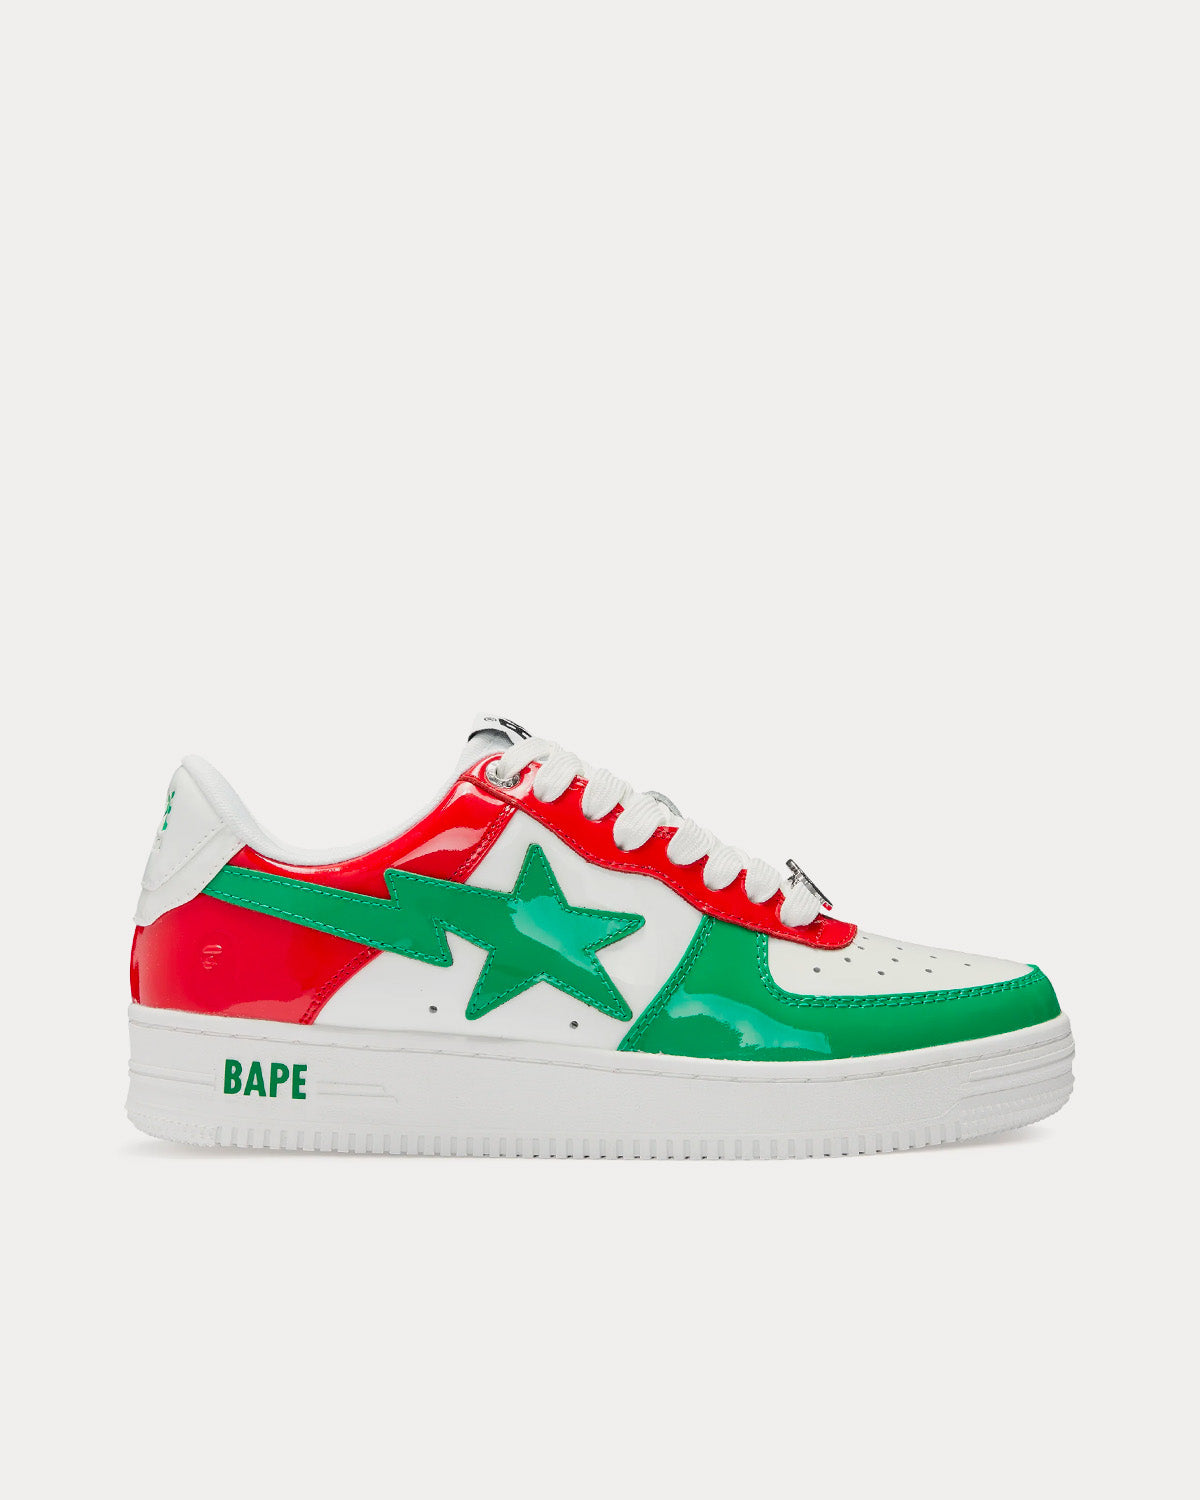 Red Green And White Shoes Online | bellvalefarms.com